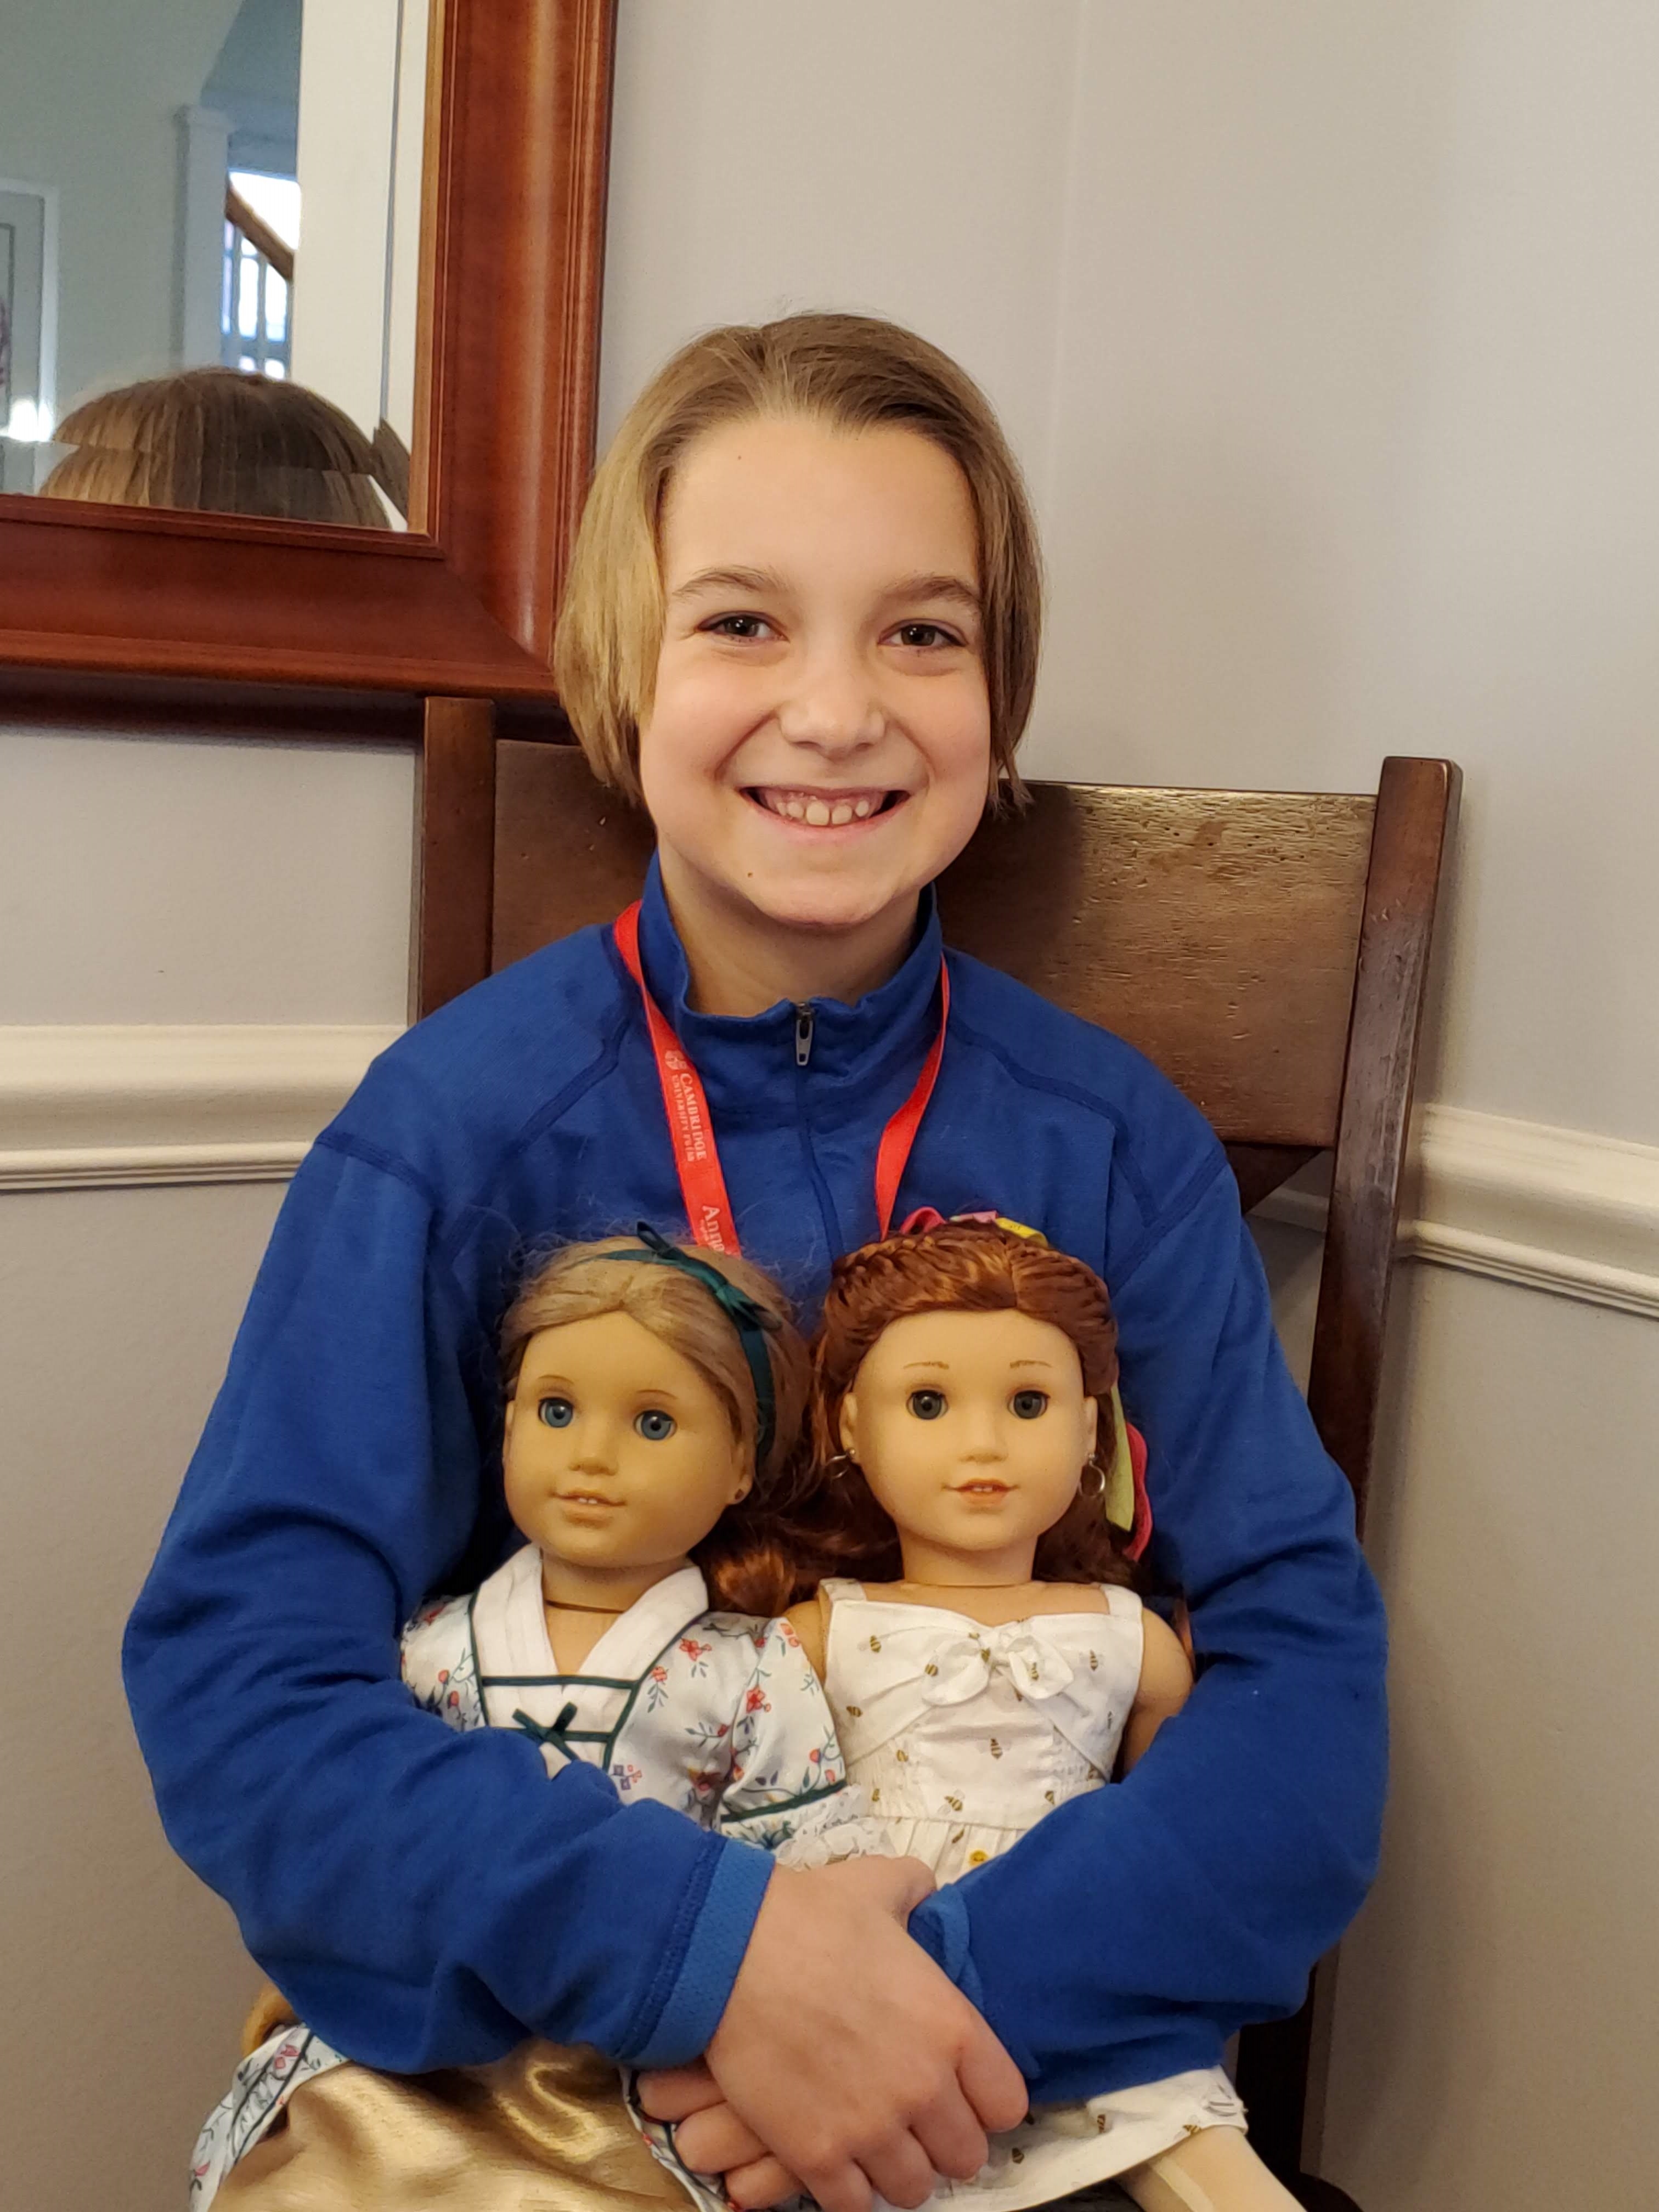 One attendee poses with her American Girl dolls, Elizabeth and Blair.